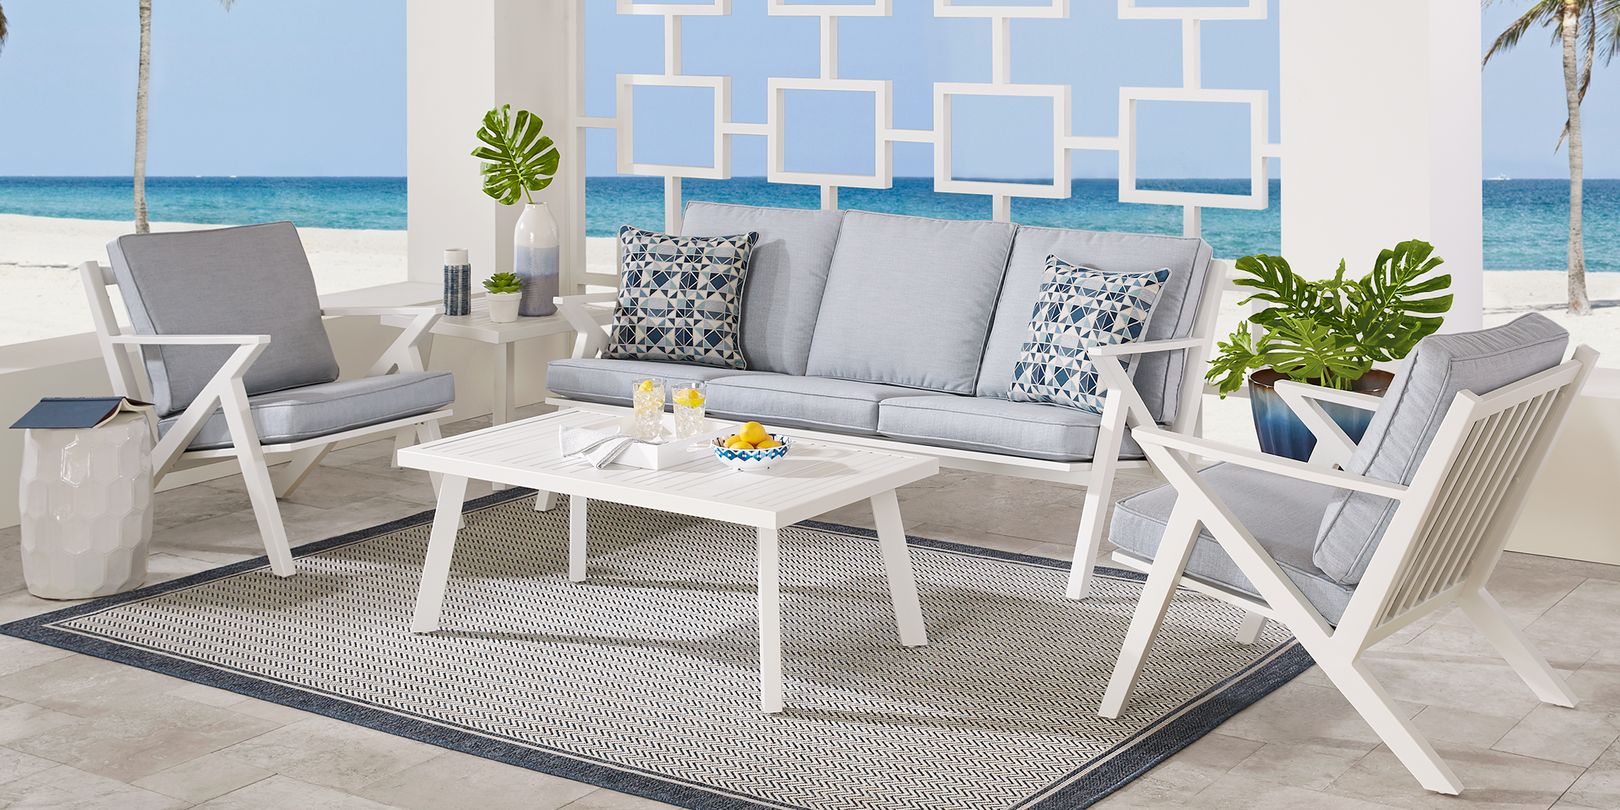 White patio seating set with blue cushions